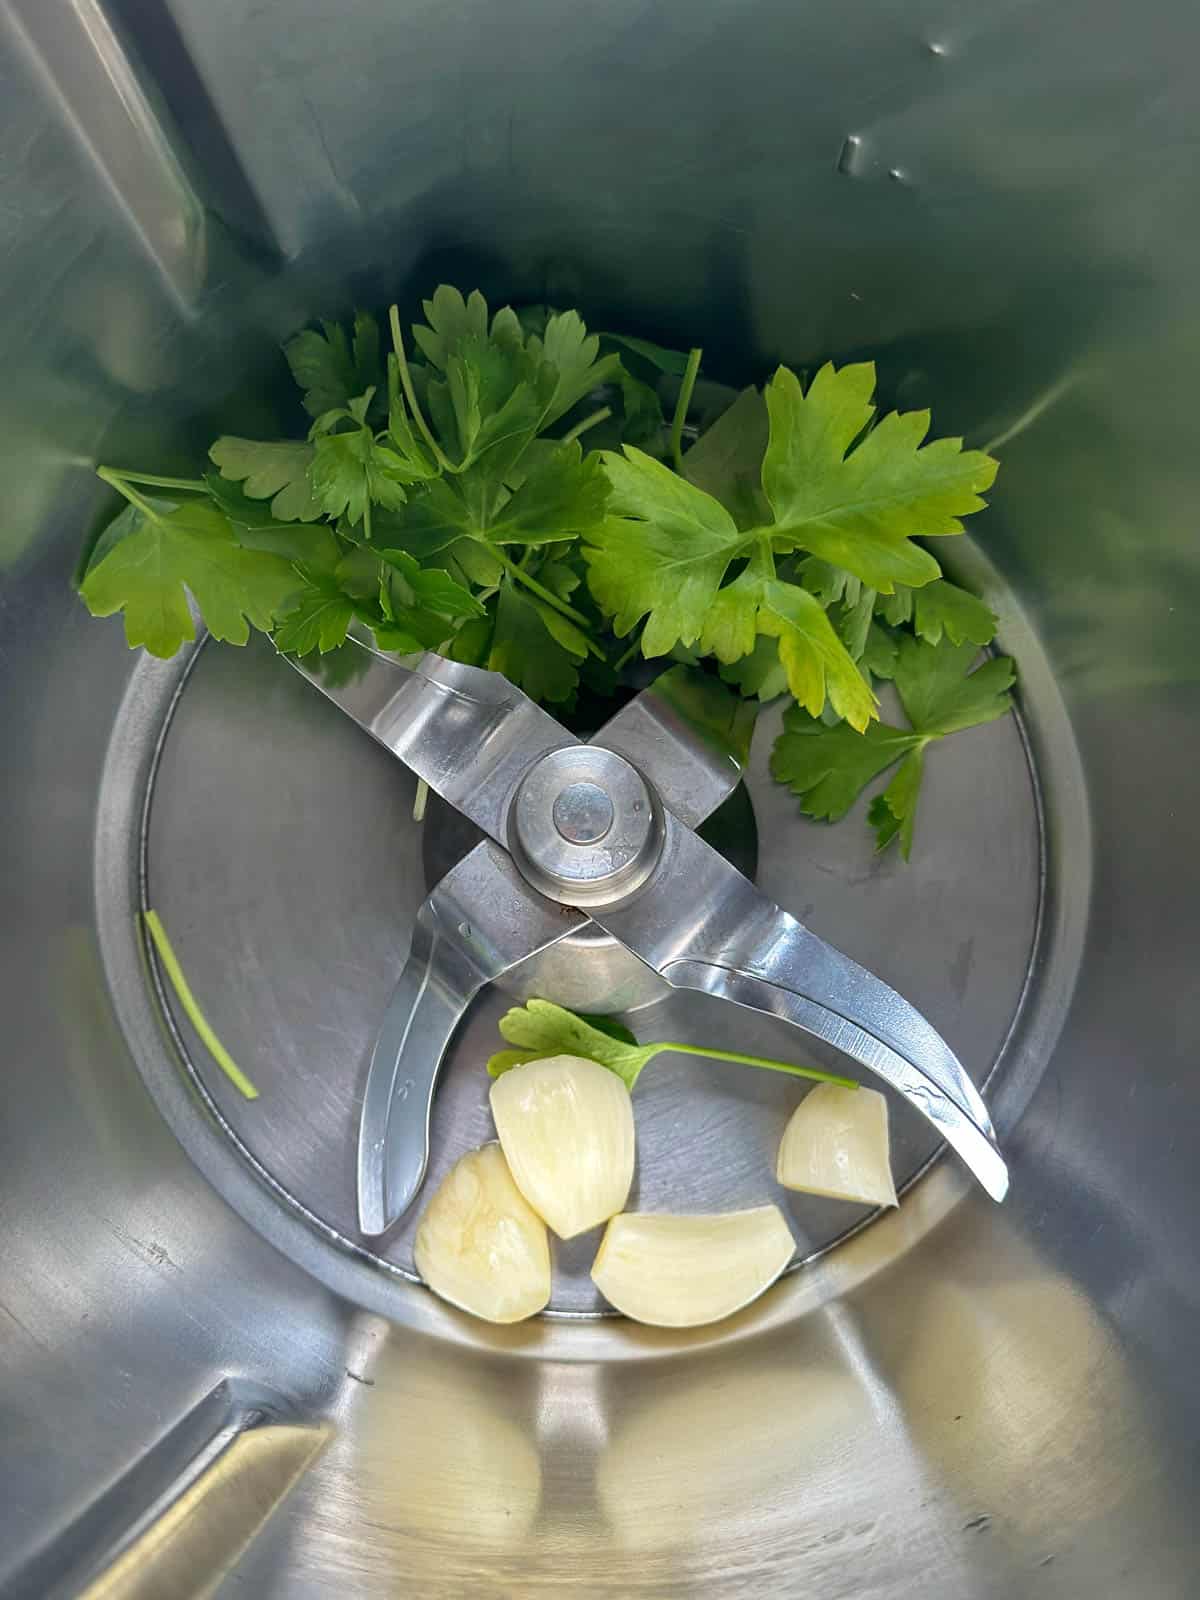 Parsley and garlic cloves in a Thermomix bowl.